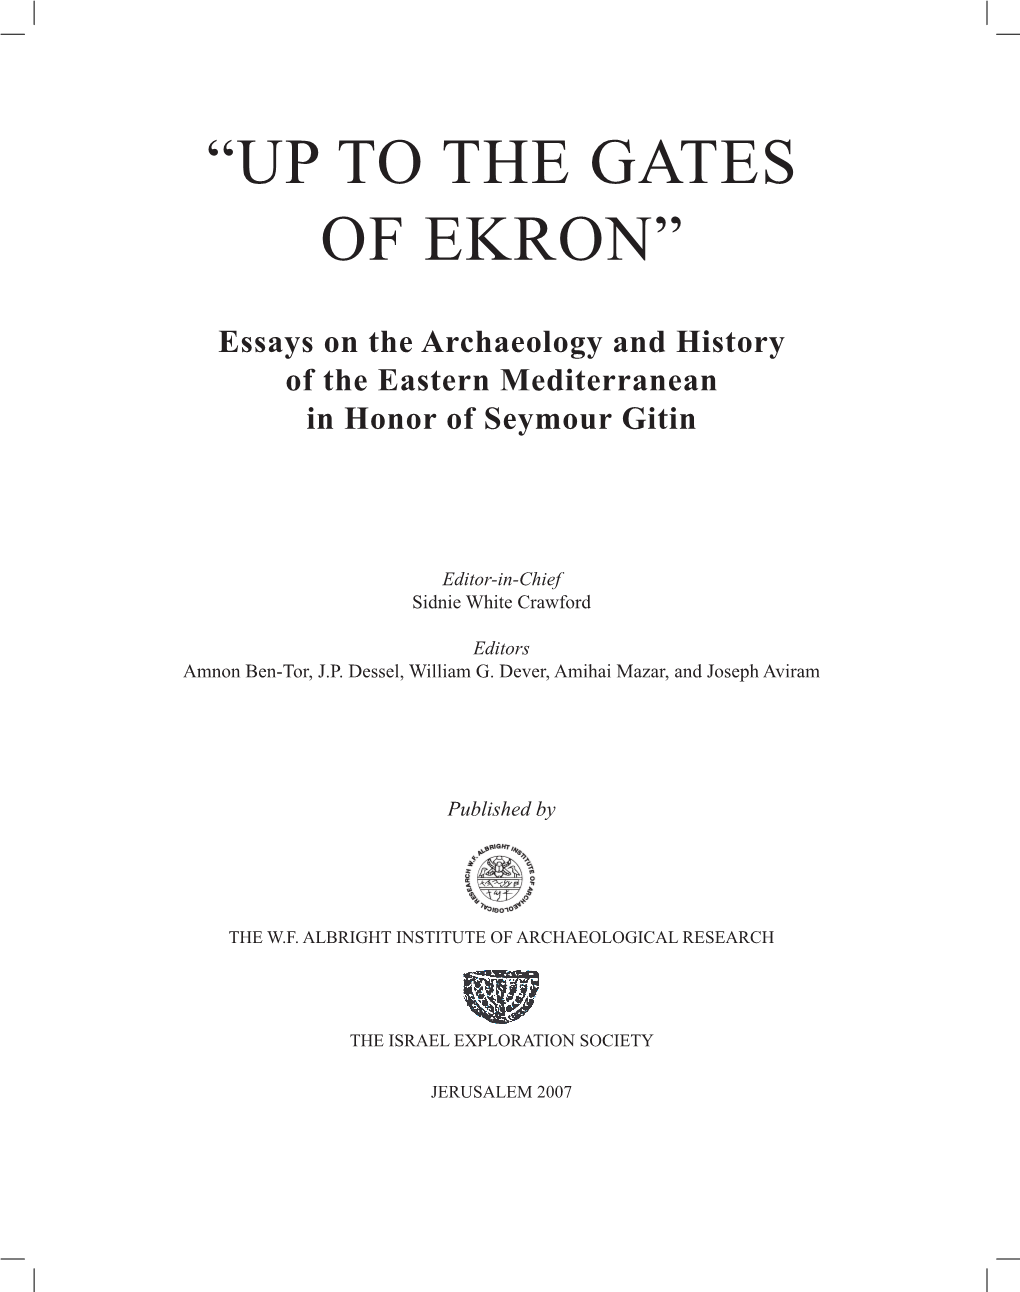 “Up to the Gates of Ekron”